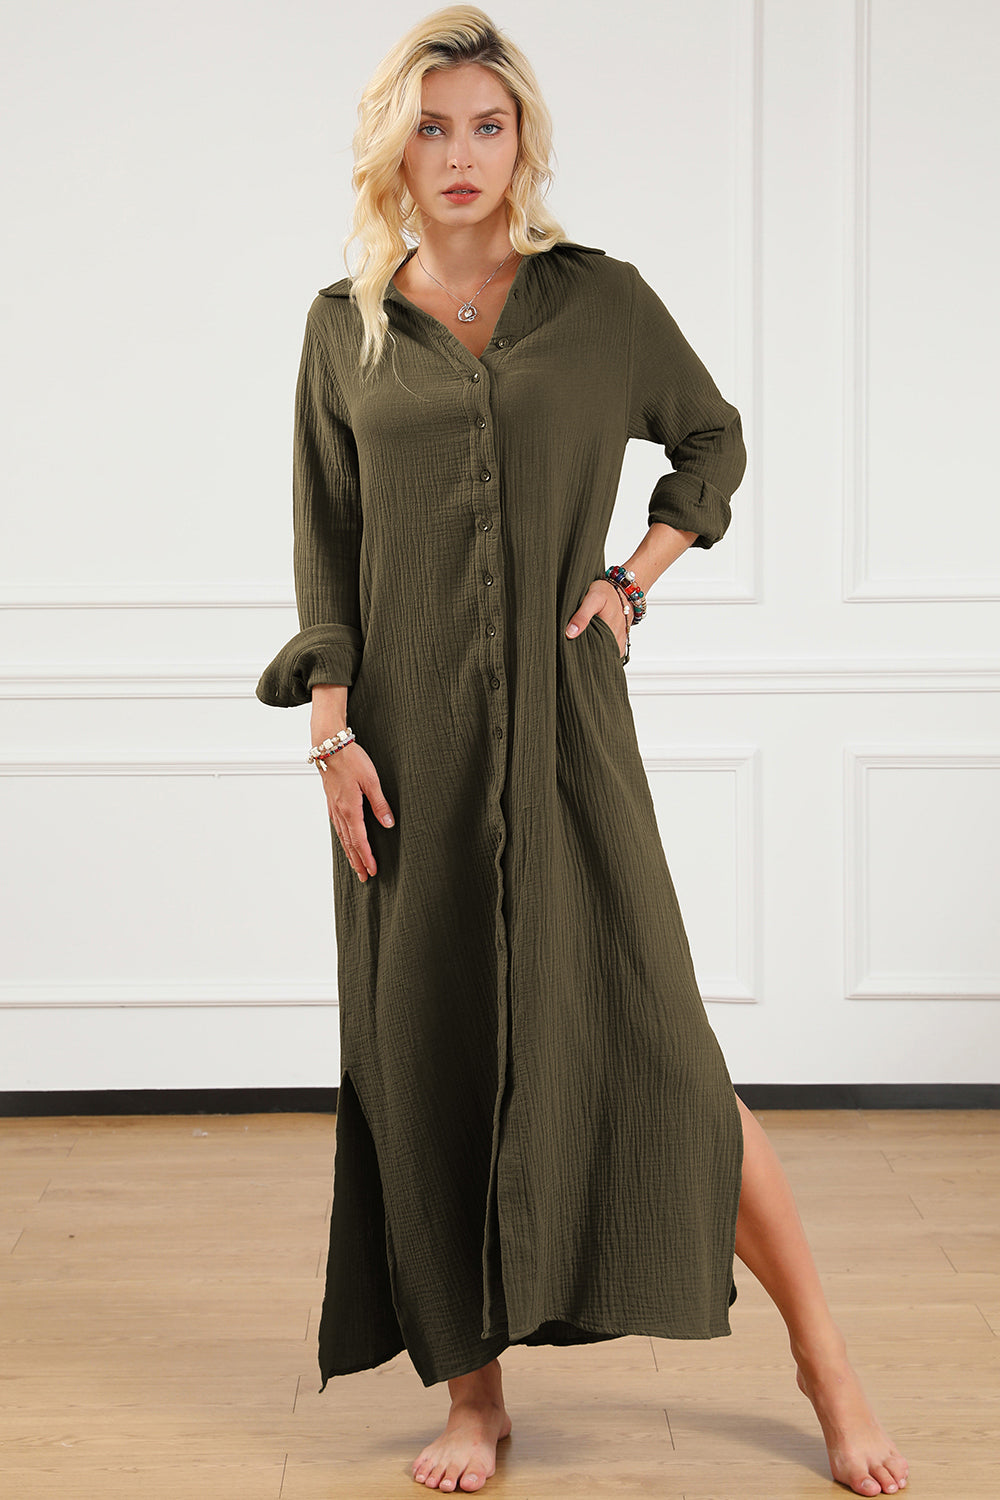 Chic Summer Beach Wedding Guest Dresses for Women Over 50: Texture Collared Neck Button Up Slit Shirt Dress - Ideal Choice for Mature Elegance and Style